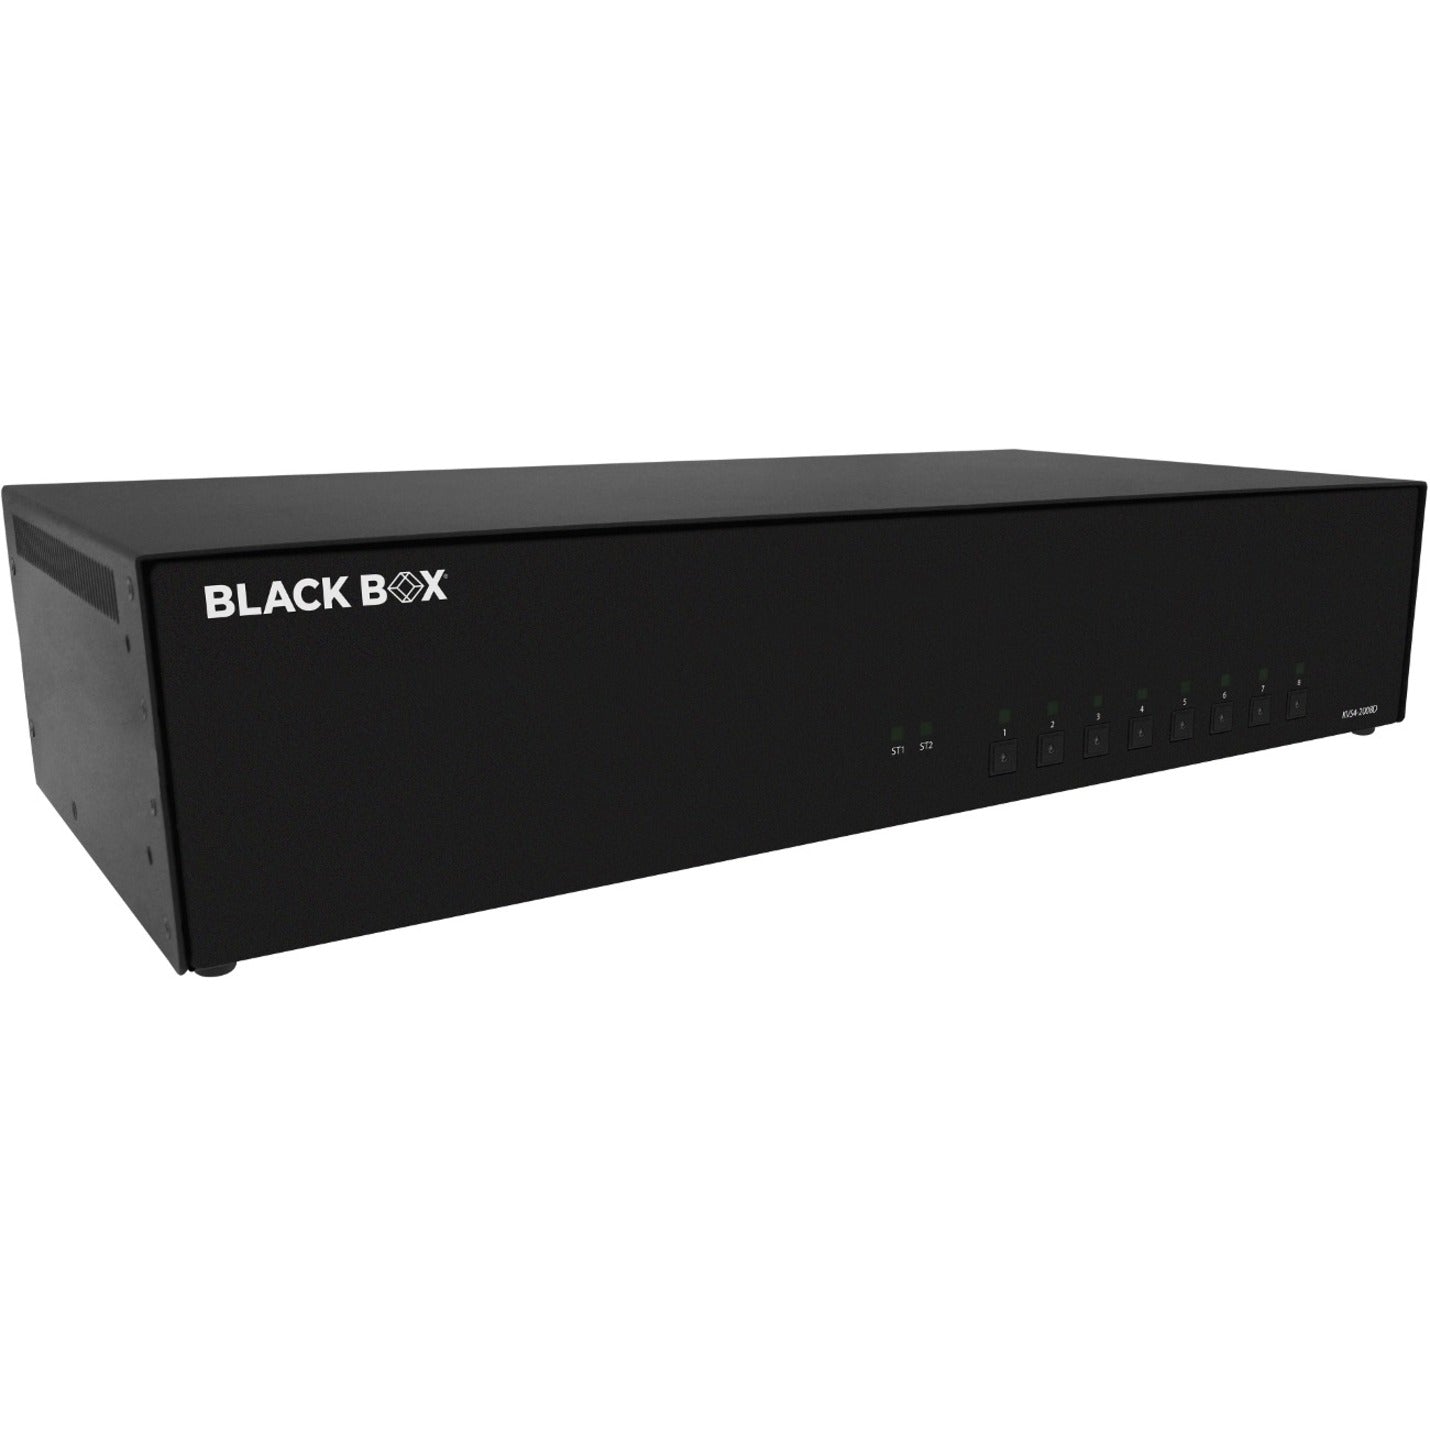 Black Box KVS4-2008D Secure KVM Switch - DVI-I, 16 Computers Supported, 1 Year Warranty